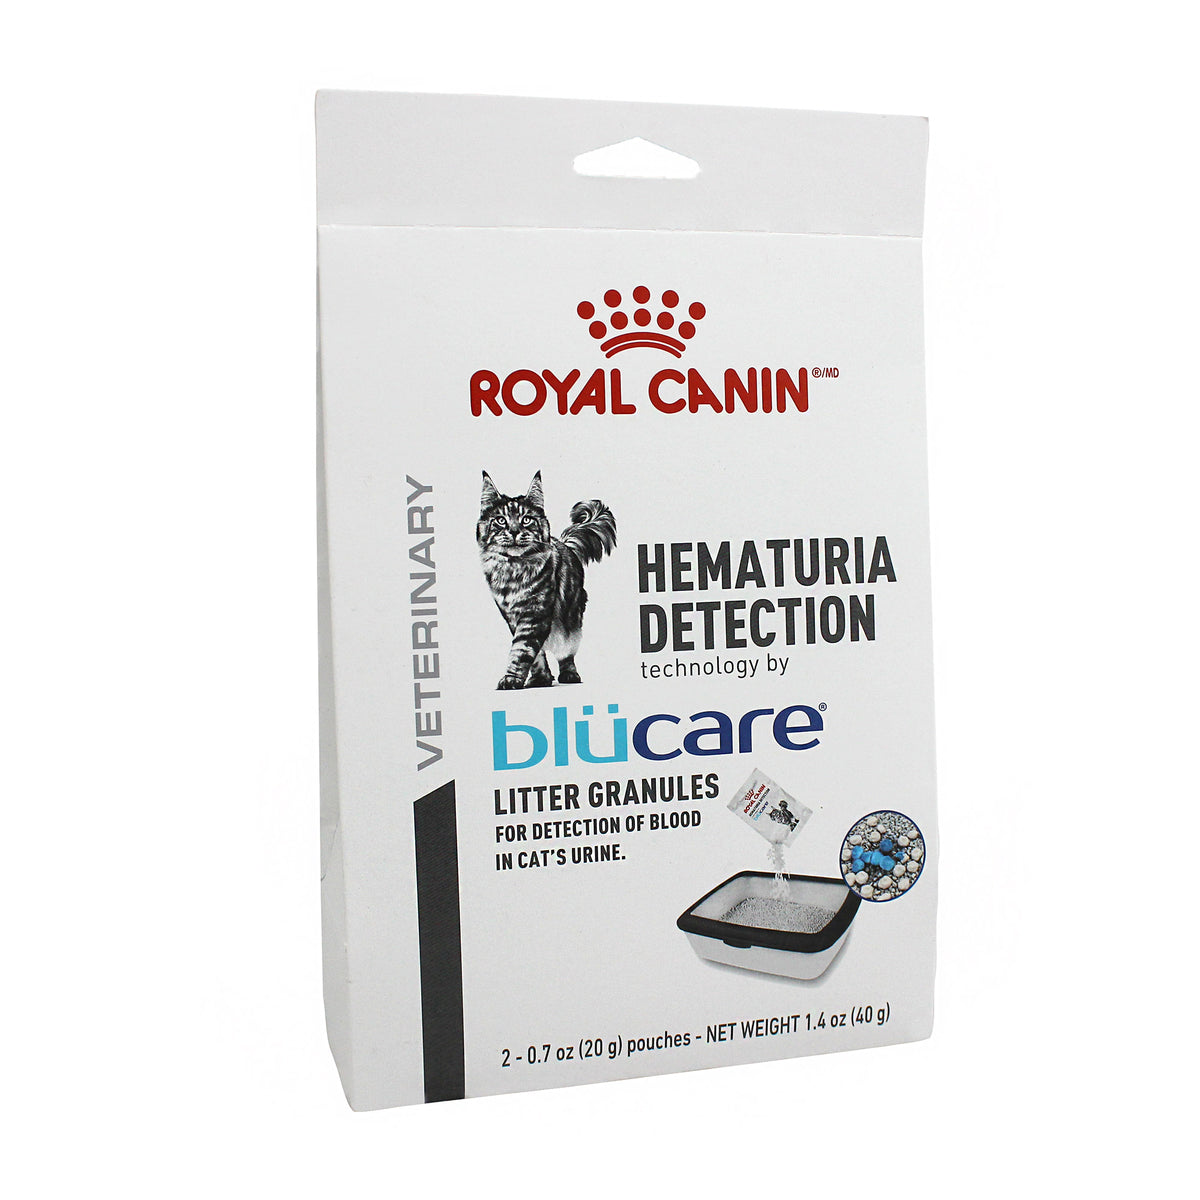 Royal Canin Hematuria Detection Litter Granules for Cats 2 x 20g